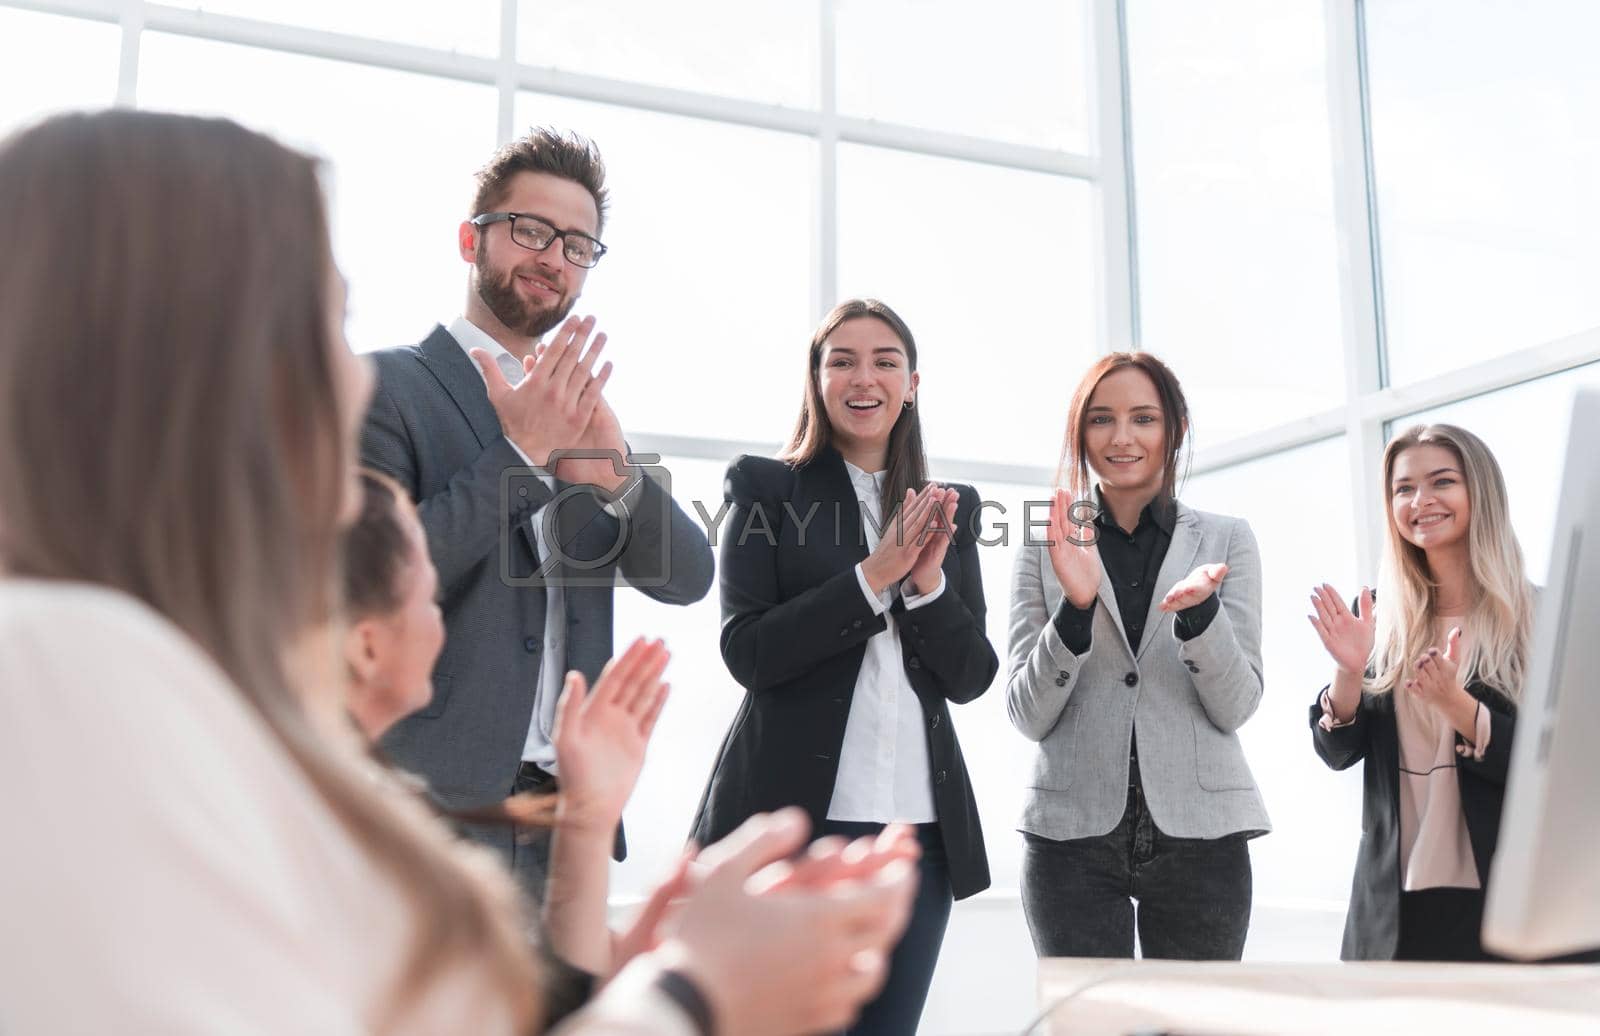 Royalty free image of group of young employees applauding their success. by asdf